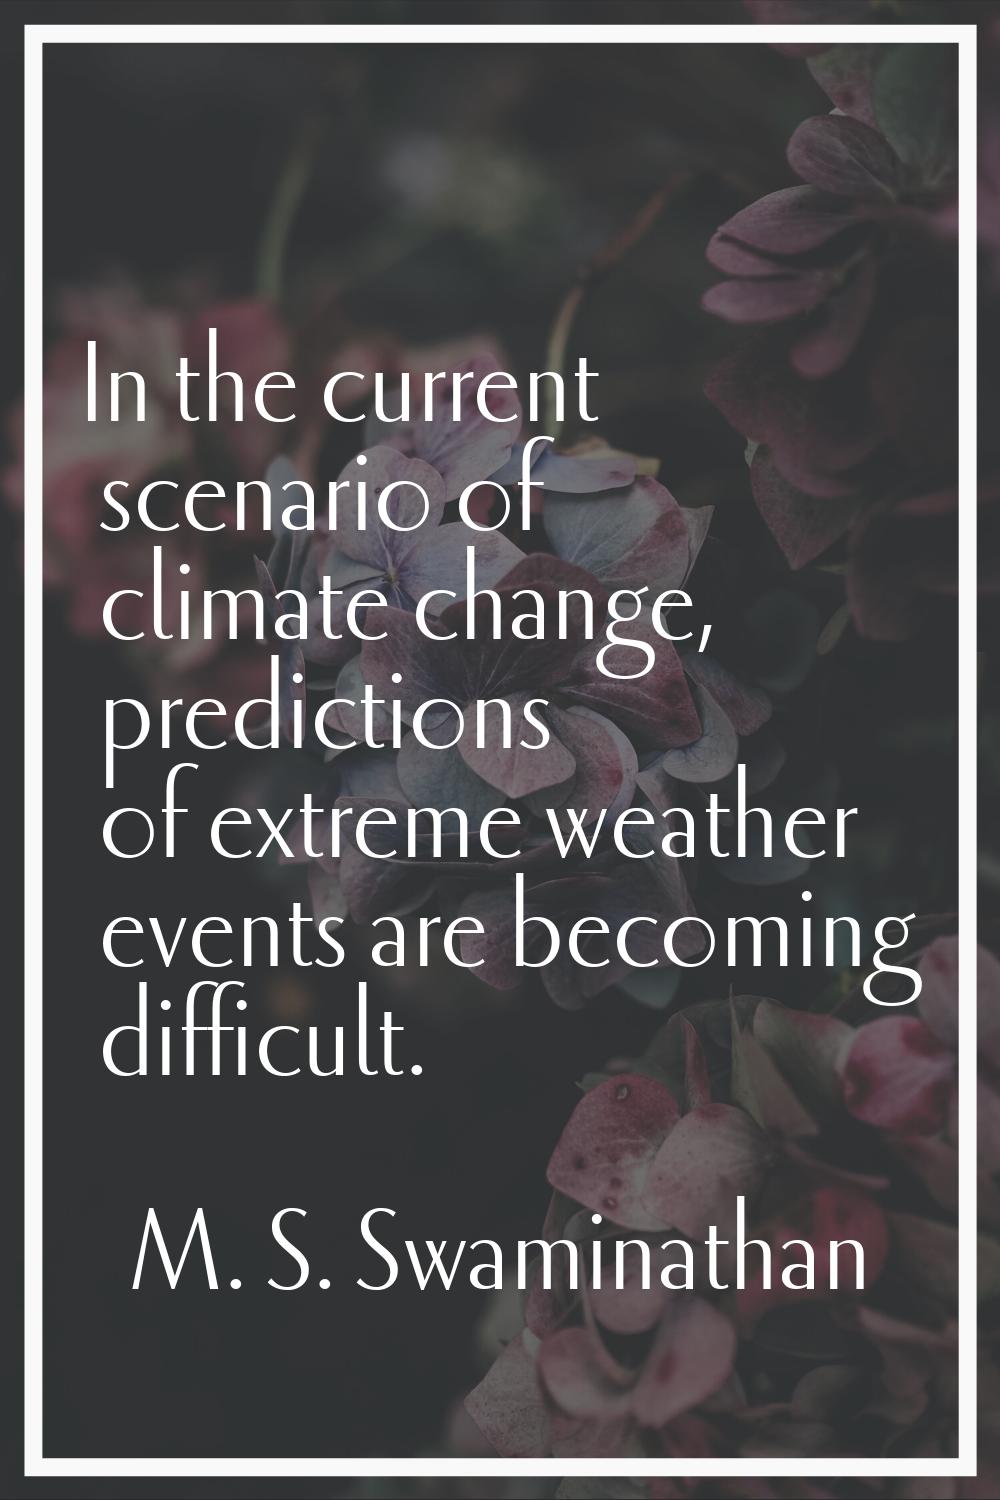 In the current scenario of climate change, predictions of extreme weather events are becoming diffi